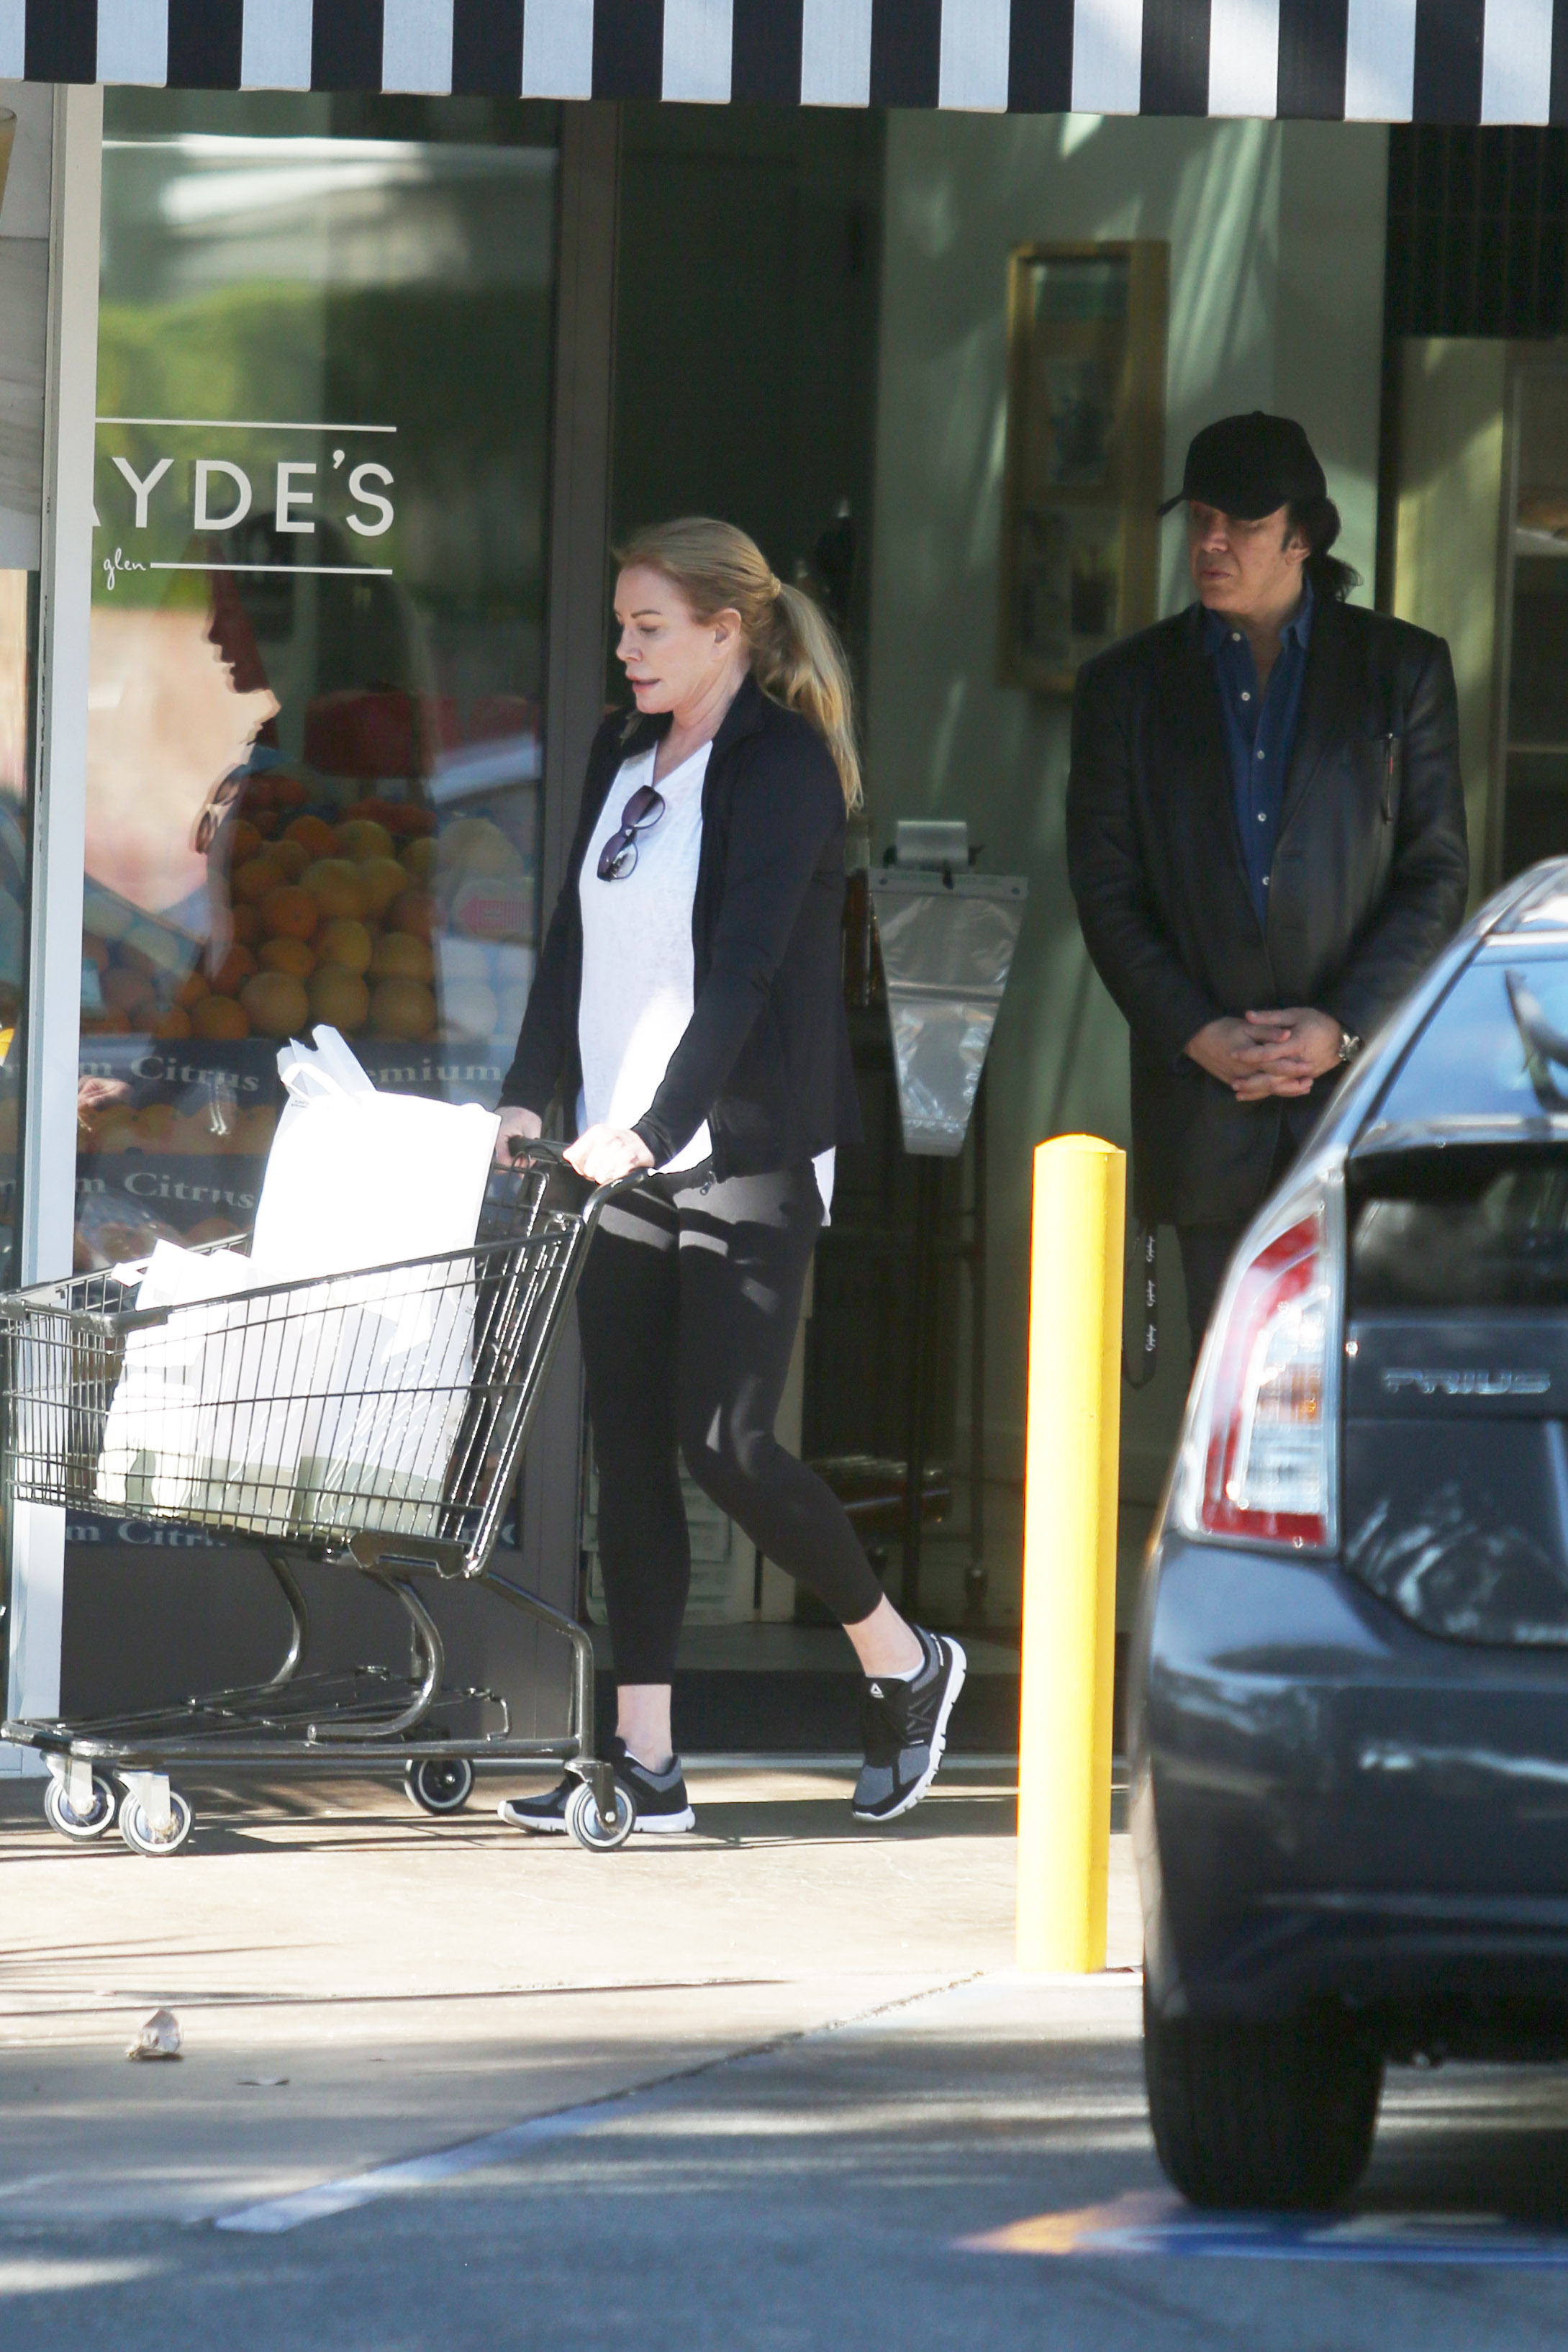 EXCLUSIVE: KISS' Gene Simmons and his wife Shannon Tweed go grocery shopping in Bel-Air!